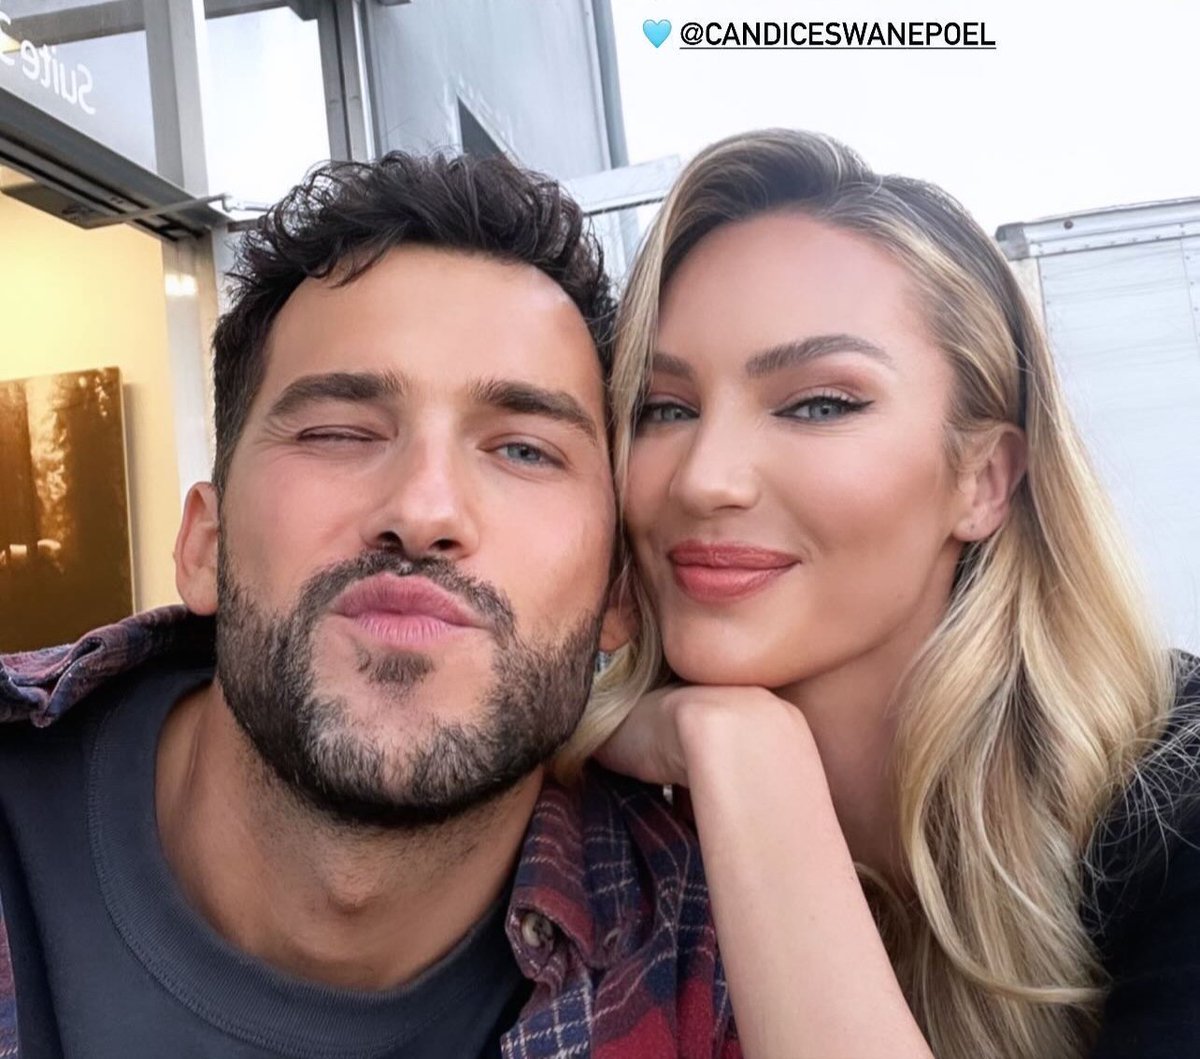 Candice Swanepoel behind the scenes of GNP Seguros upcoming campaign.